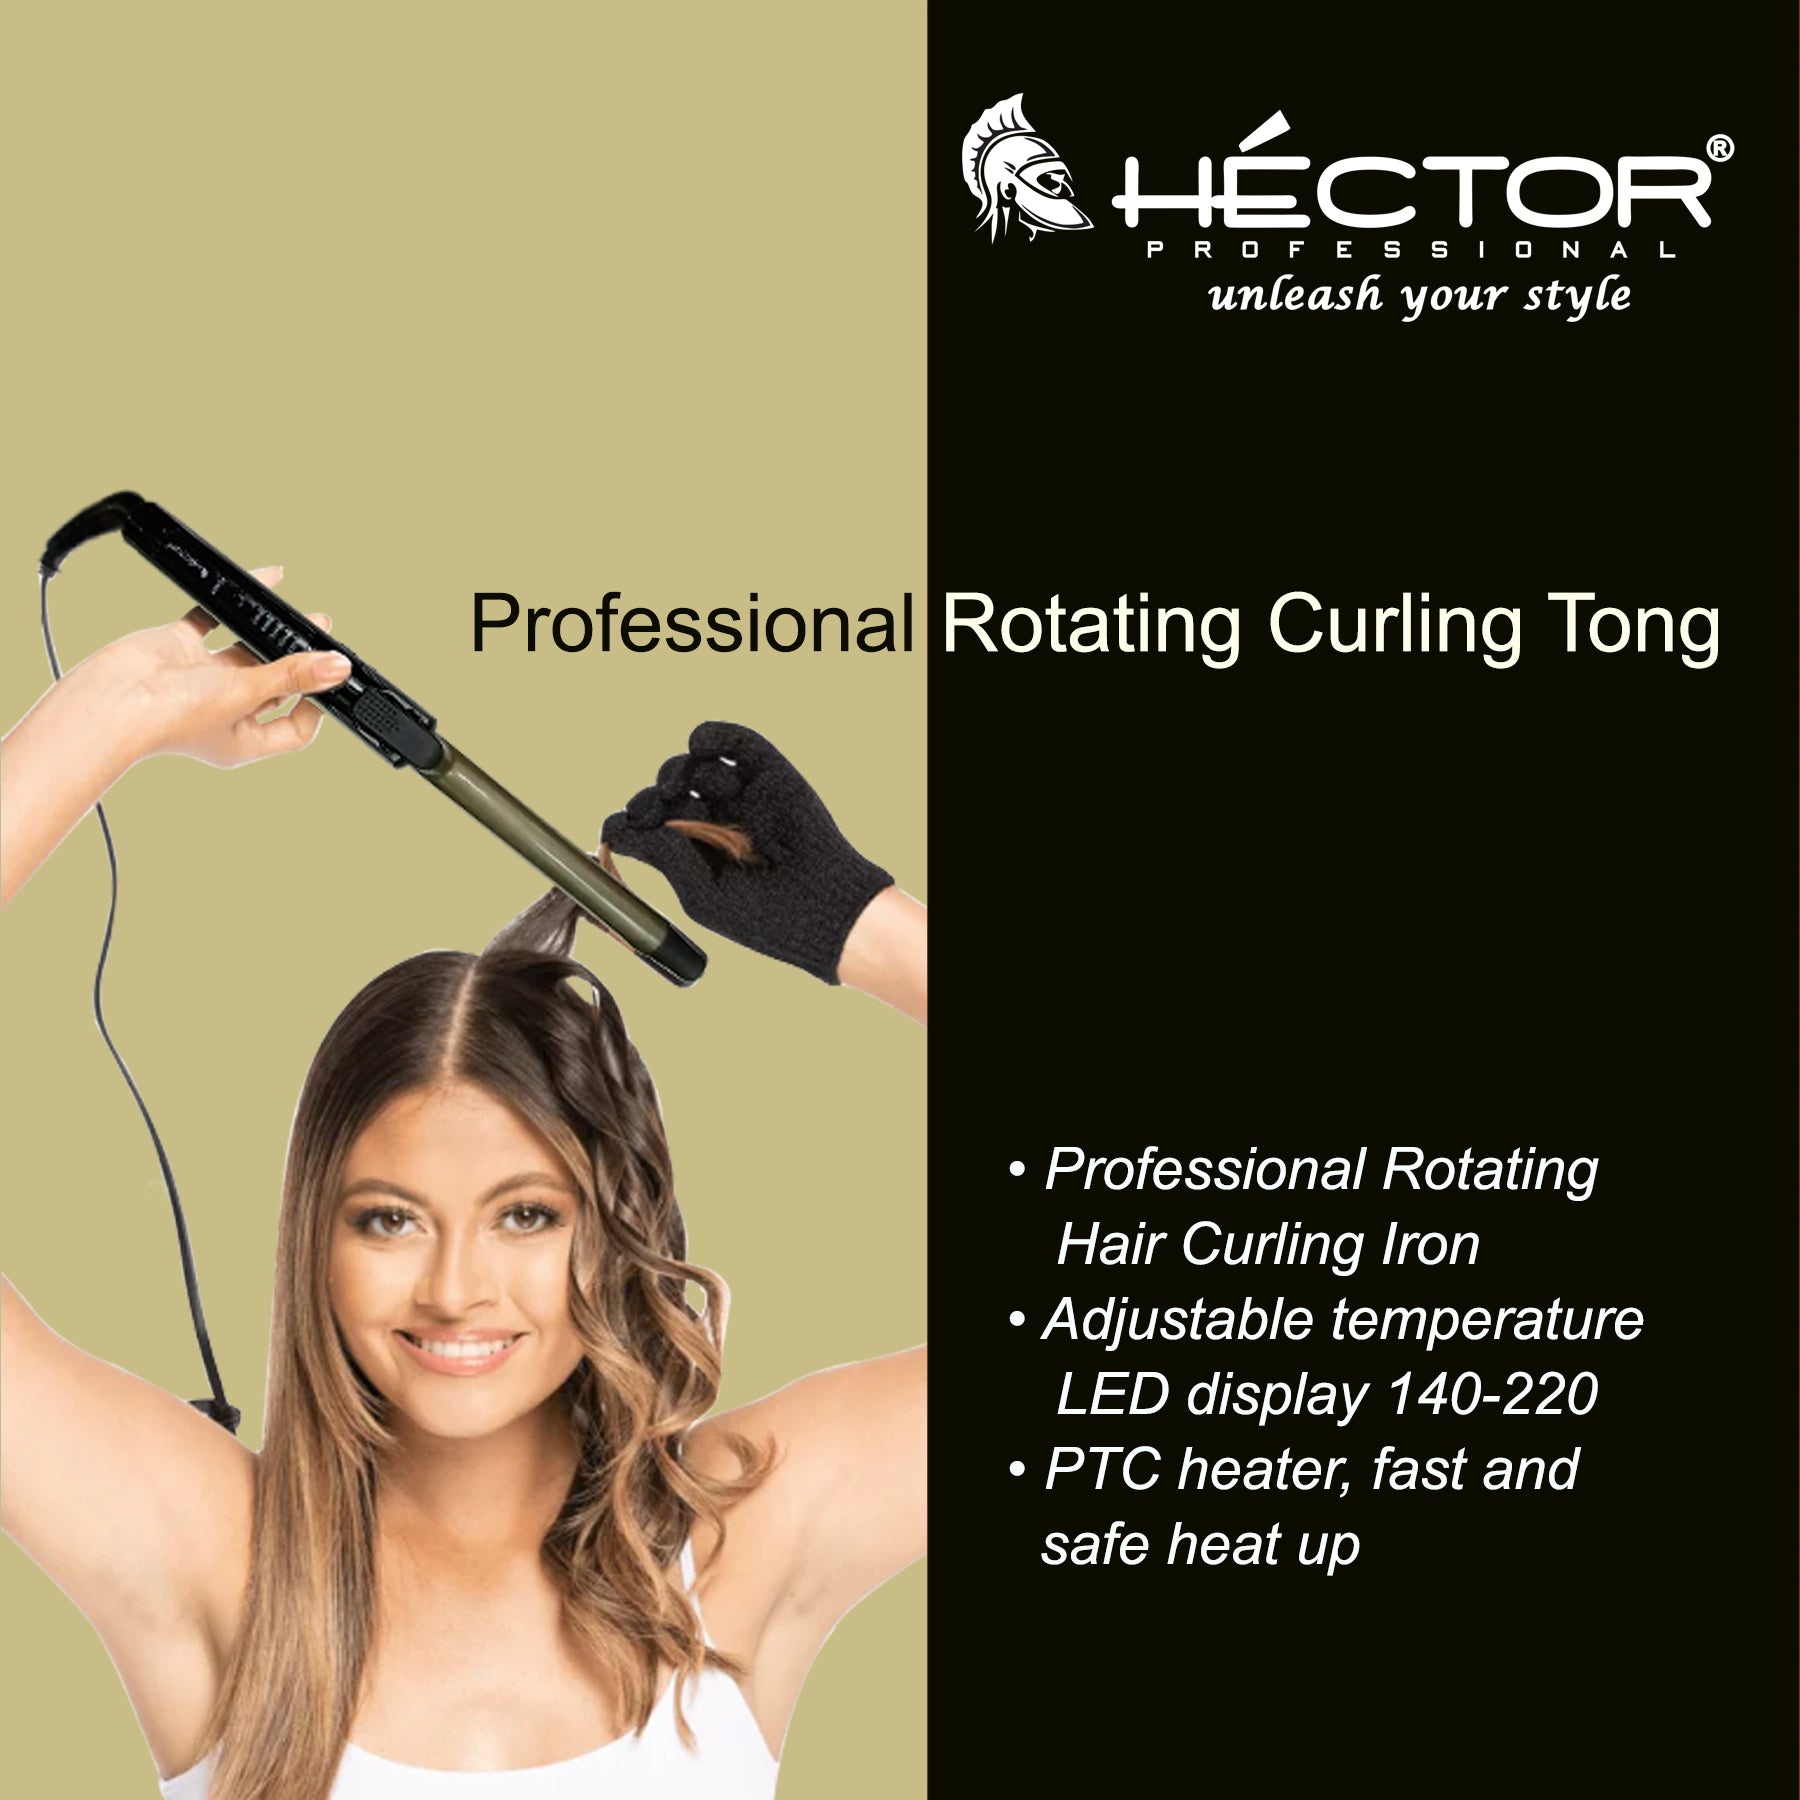 Hector Professional Rotating Hair Curler with 25MM Barrel, Rod, Titanium Coated Plates, Cool Touch Tip, Fast Heating, for Women, Long and Short Hair Curling, Styling, Black & Graceful Green